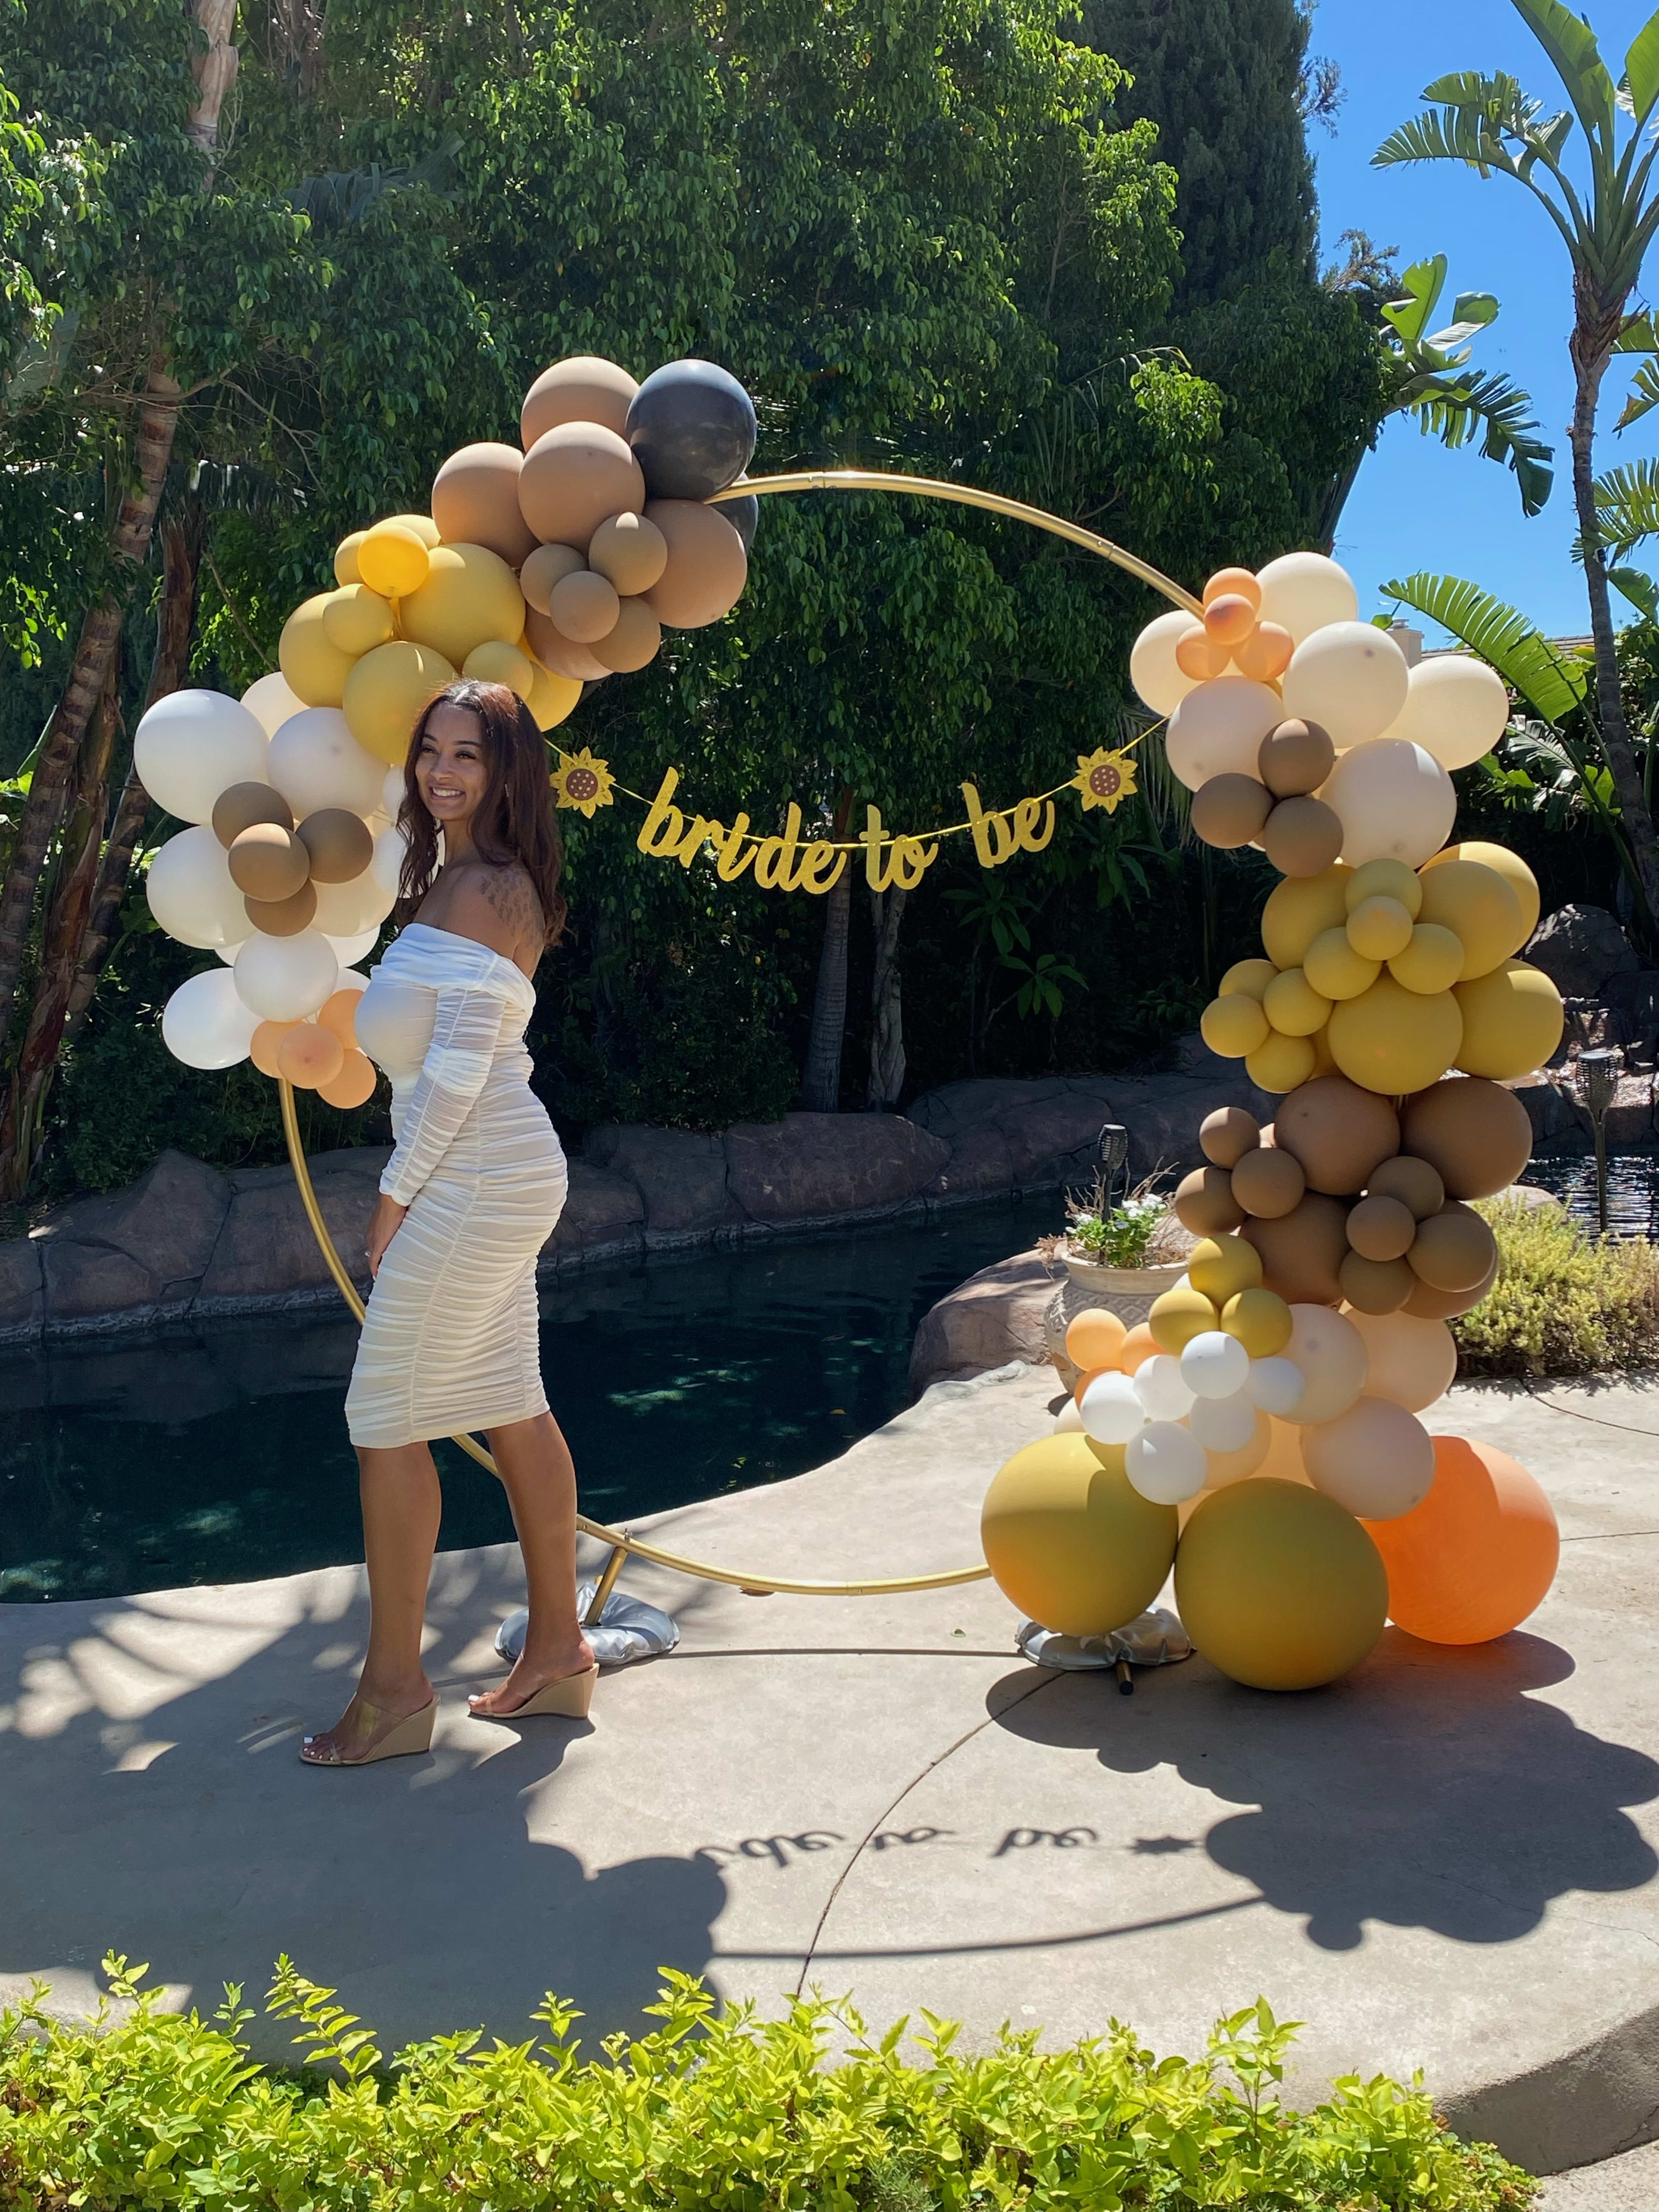 A woman in front of lots of yellow balloons theme arc in an outdoor garden in a bridal shower.